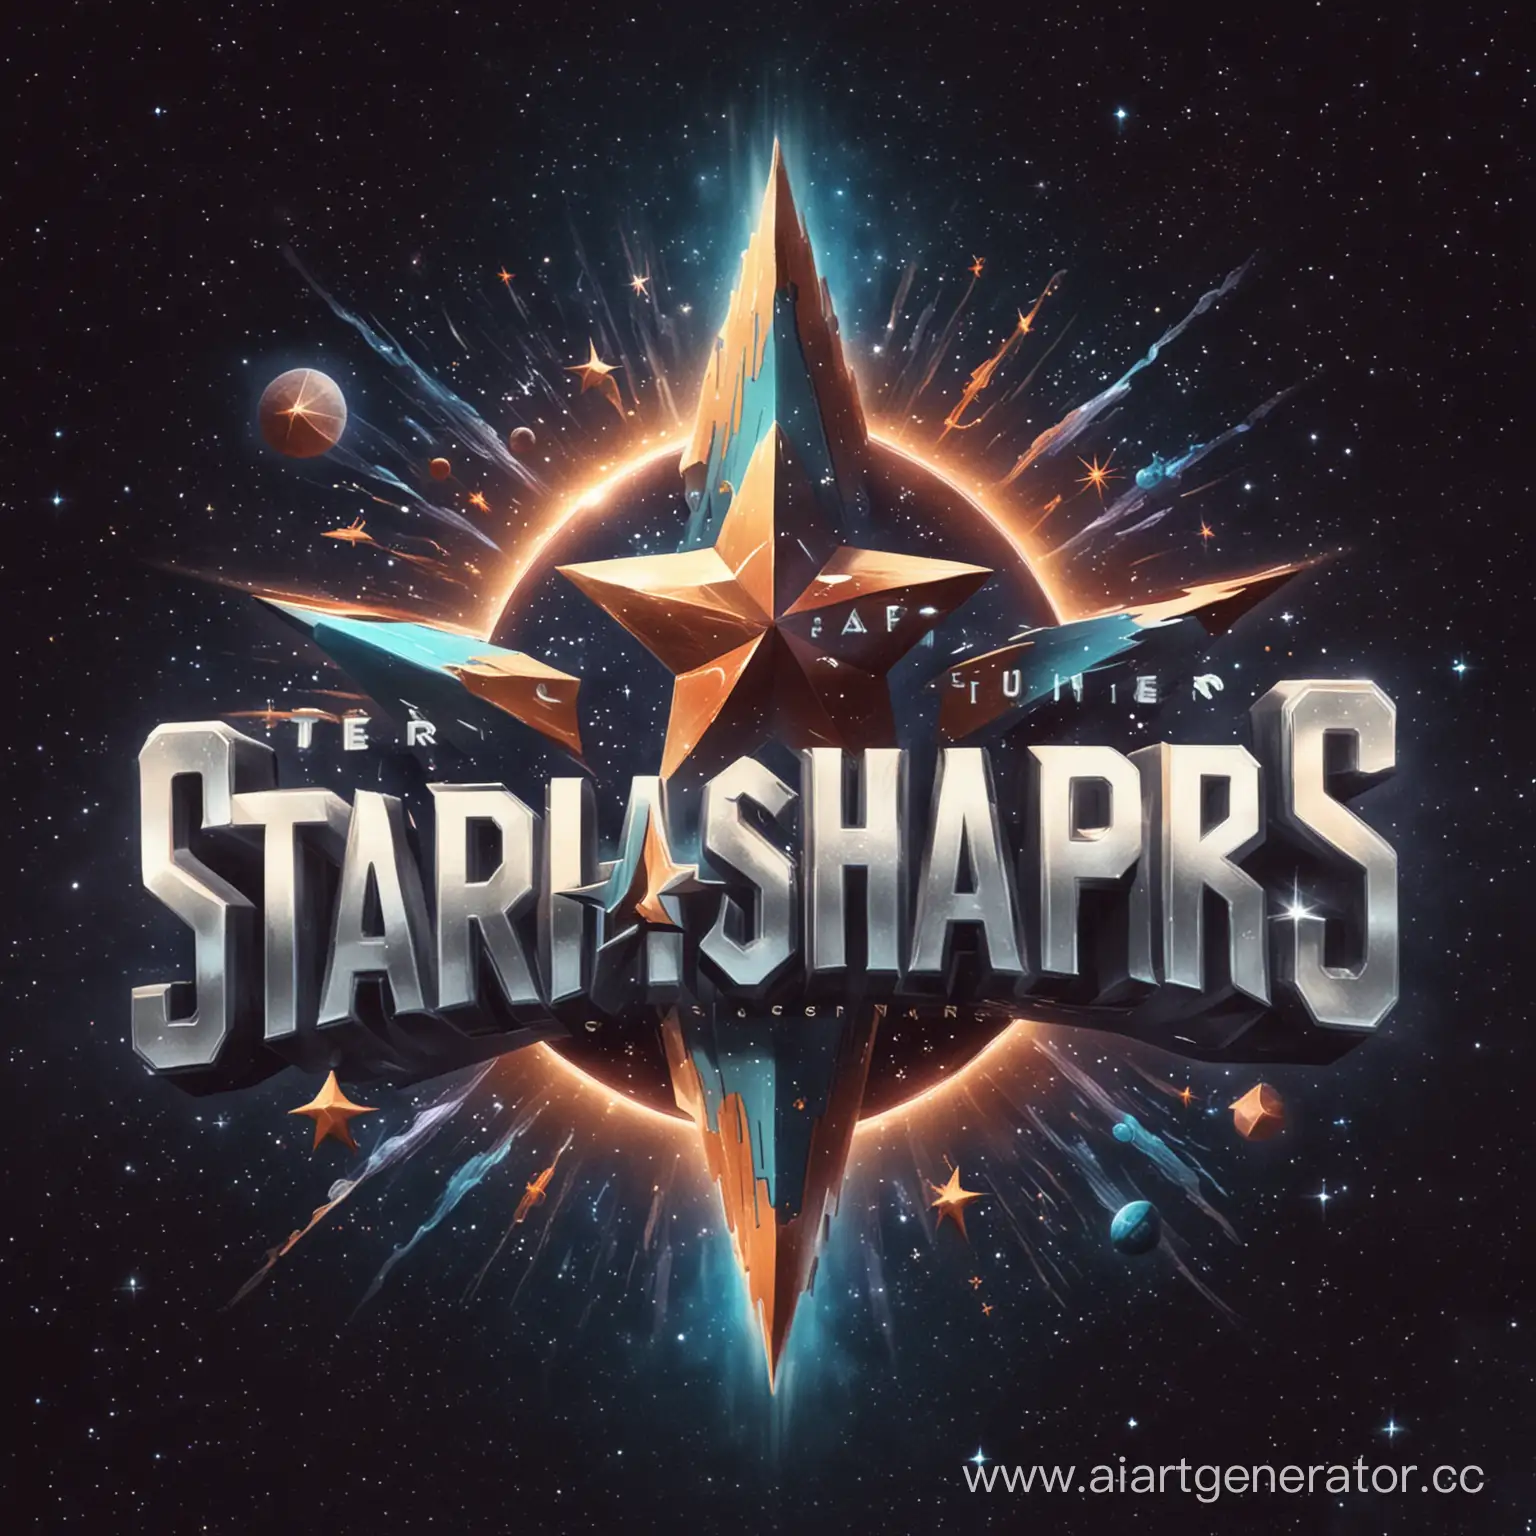 Logo with the text "STARSHAPERS"